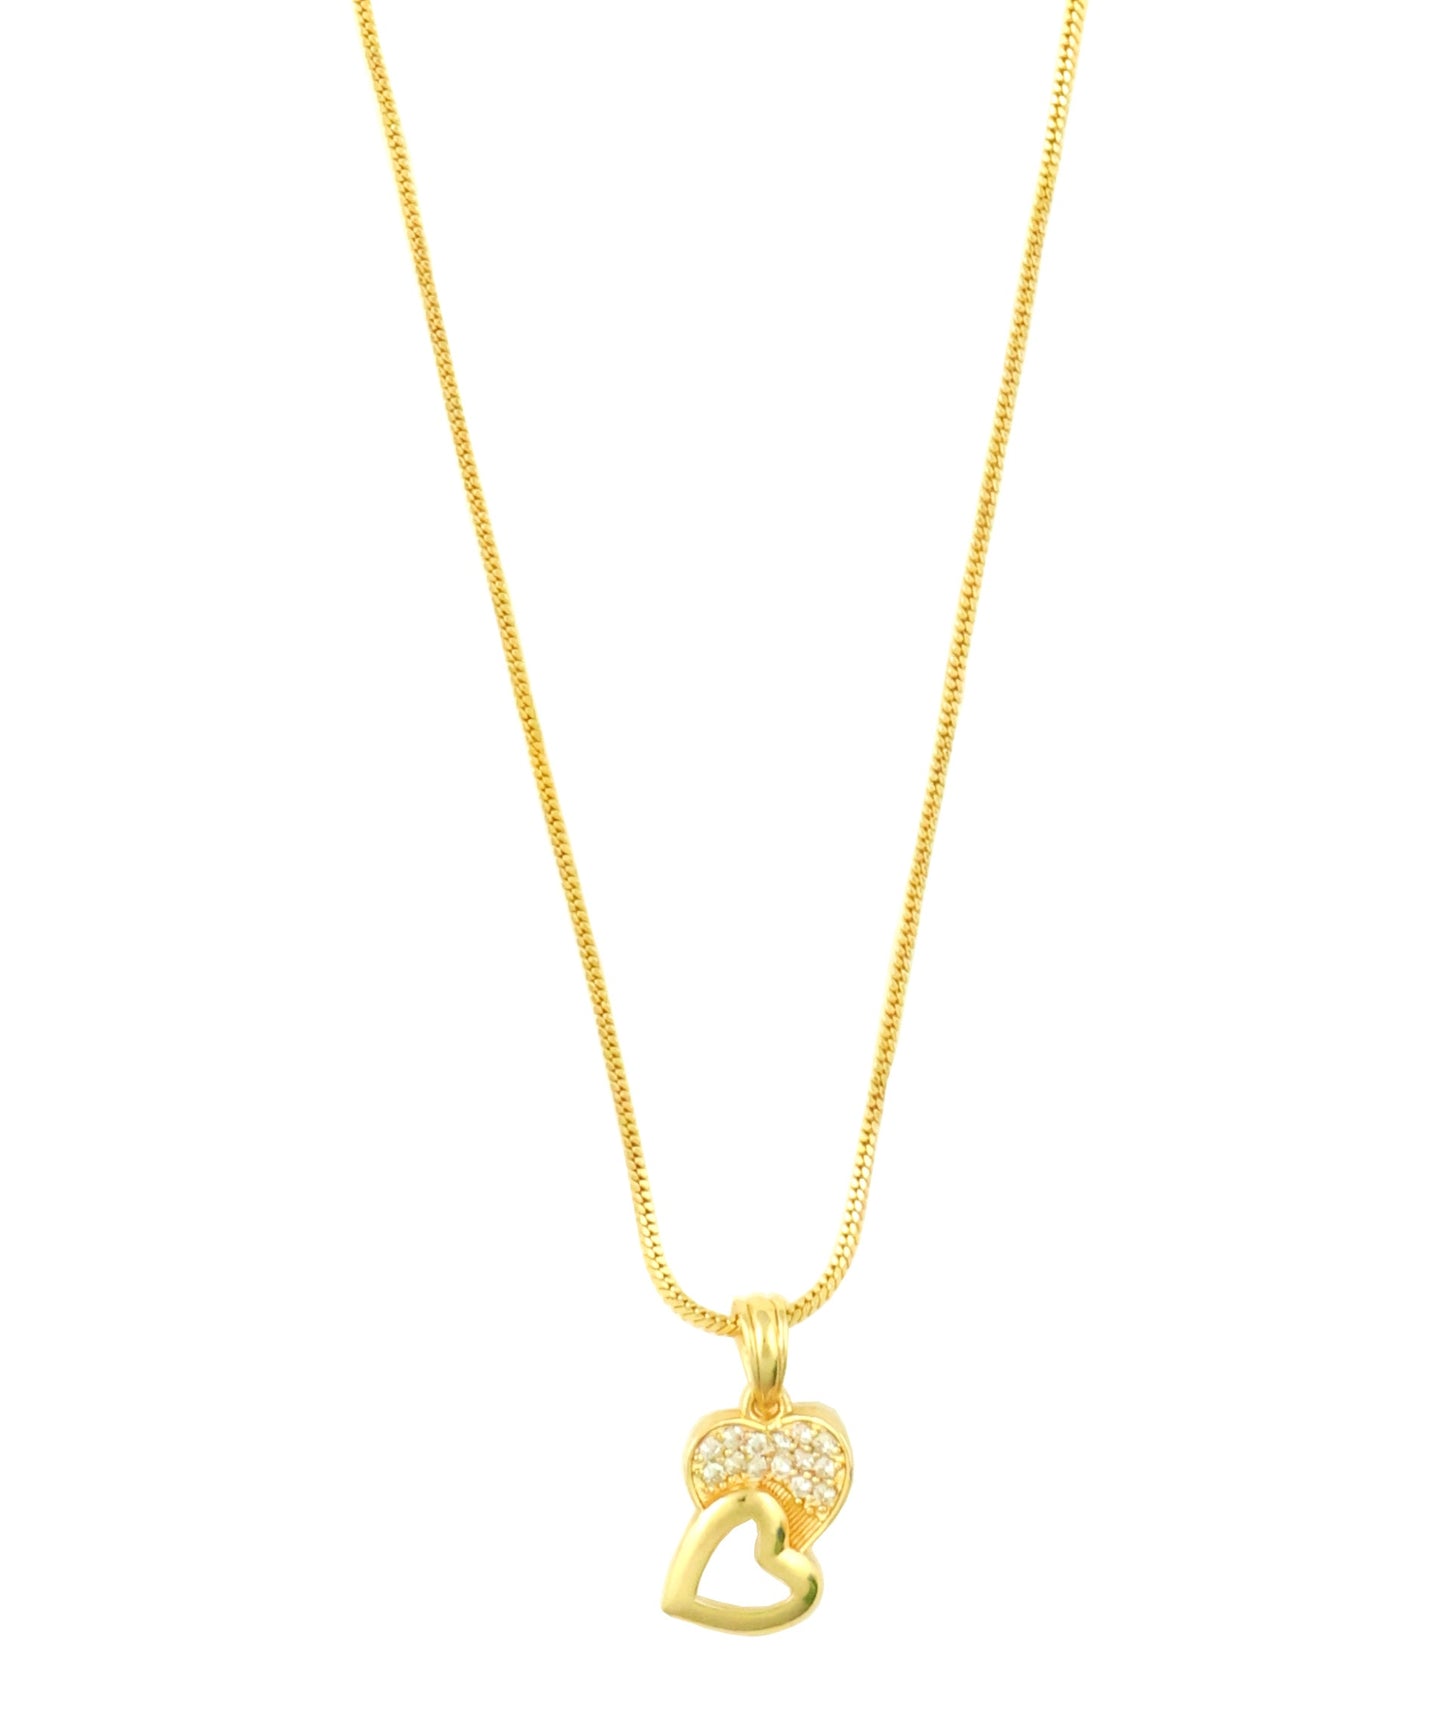 Stylish Gold Plated Pendant  by Mekkna - Elevate Your Look Today